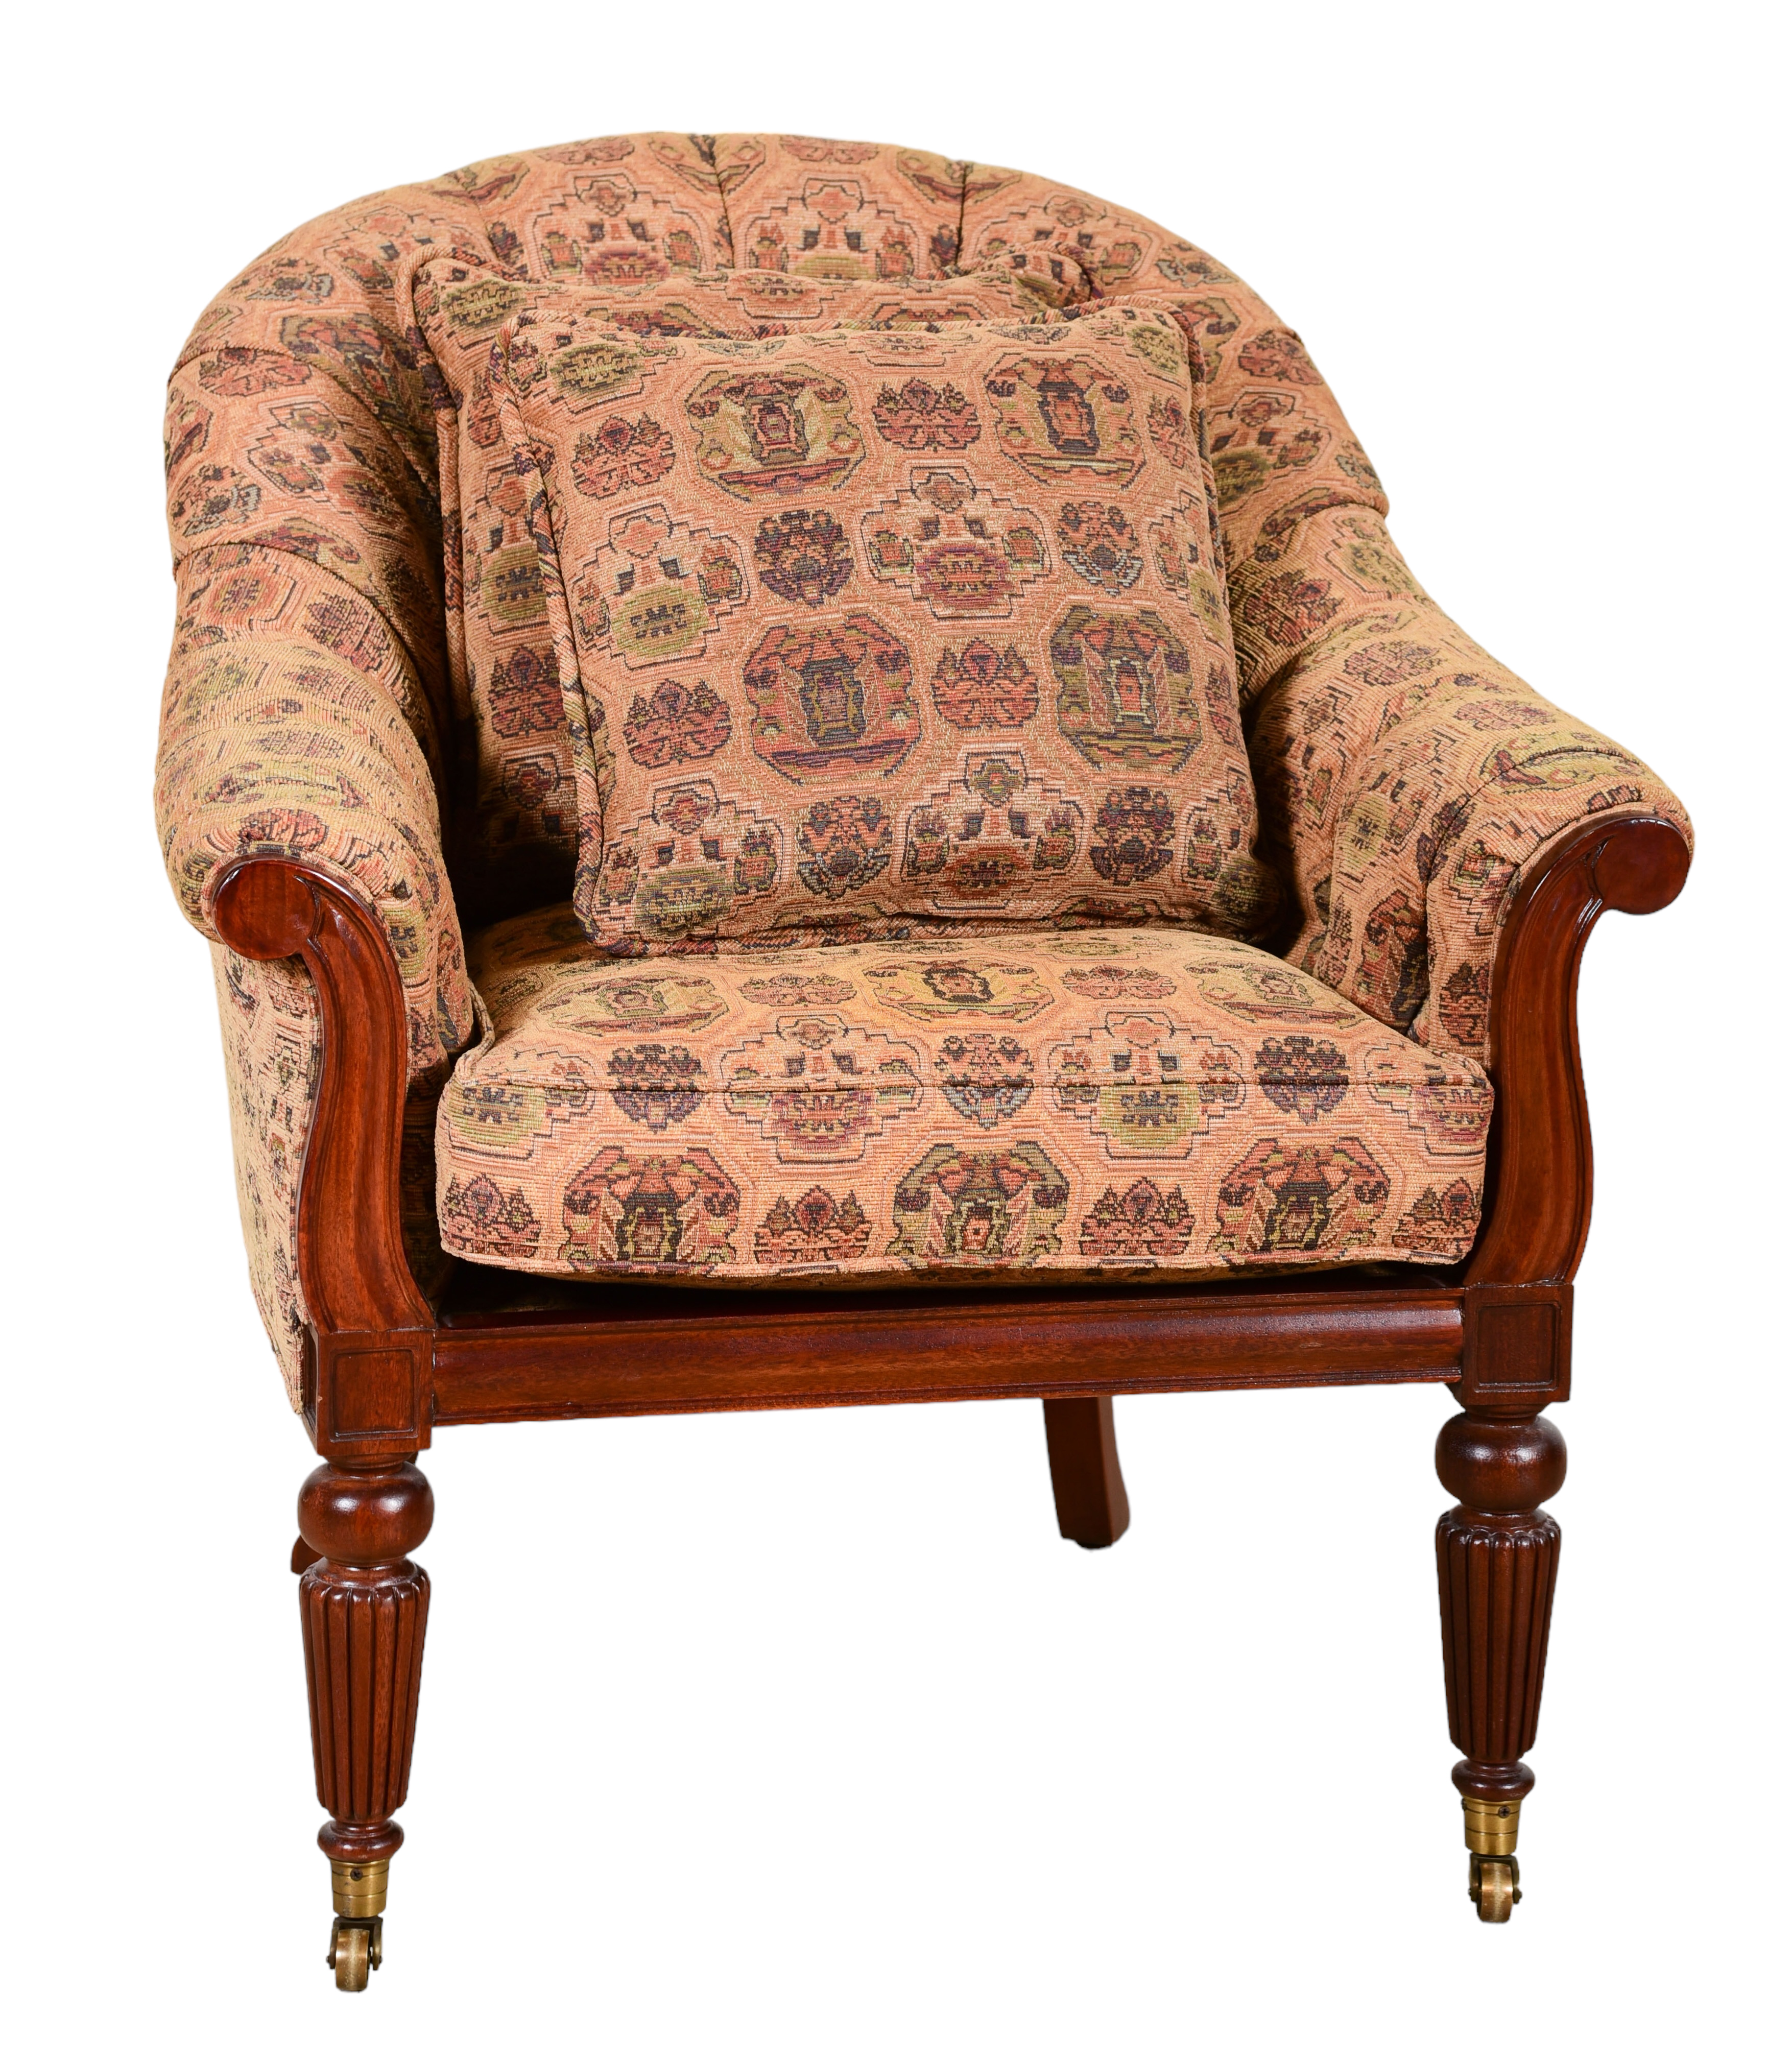 William Hampton by Hickory Chair 3c66d0